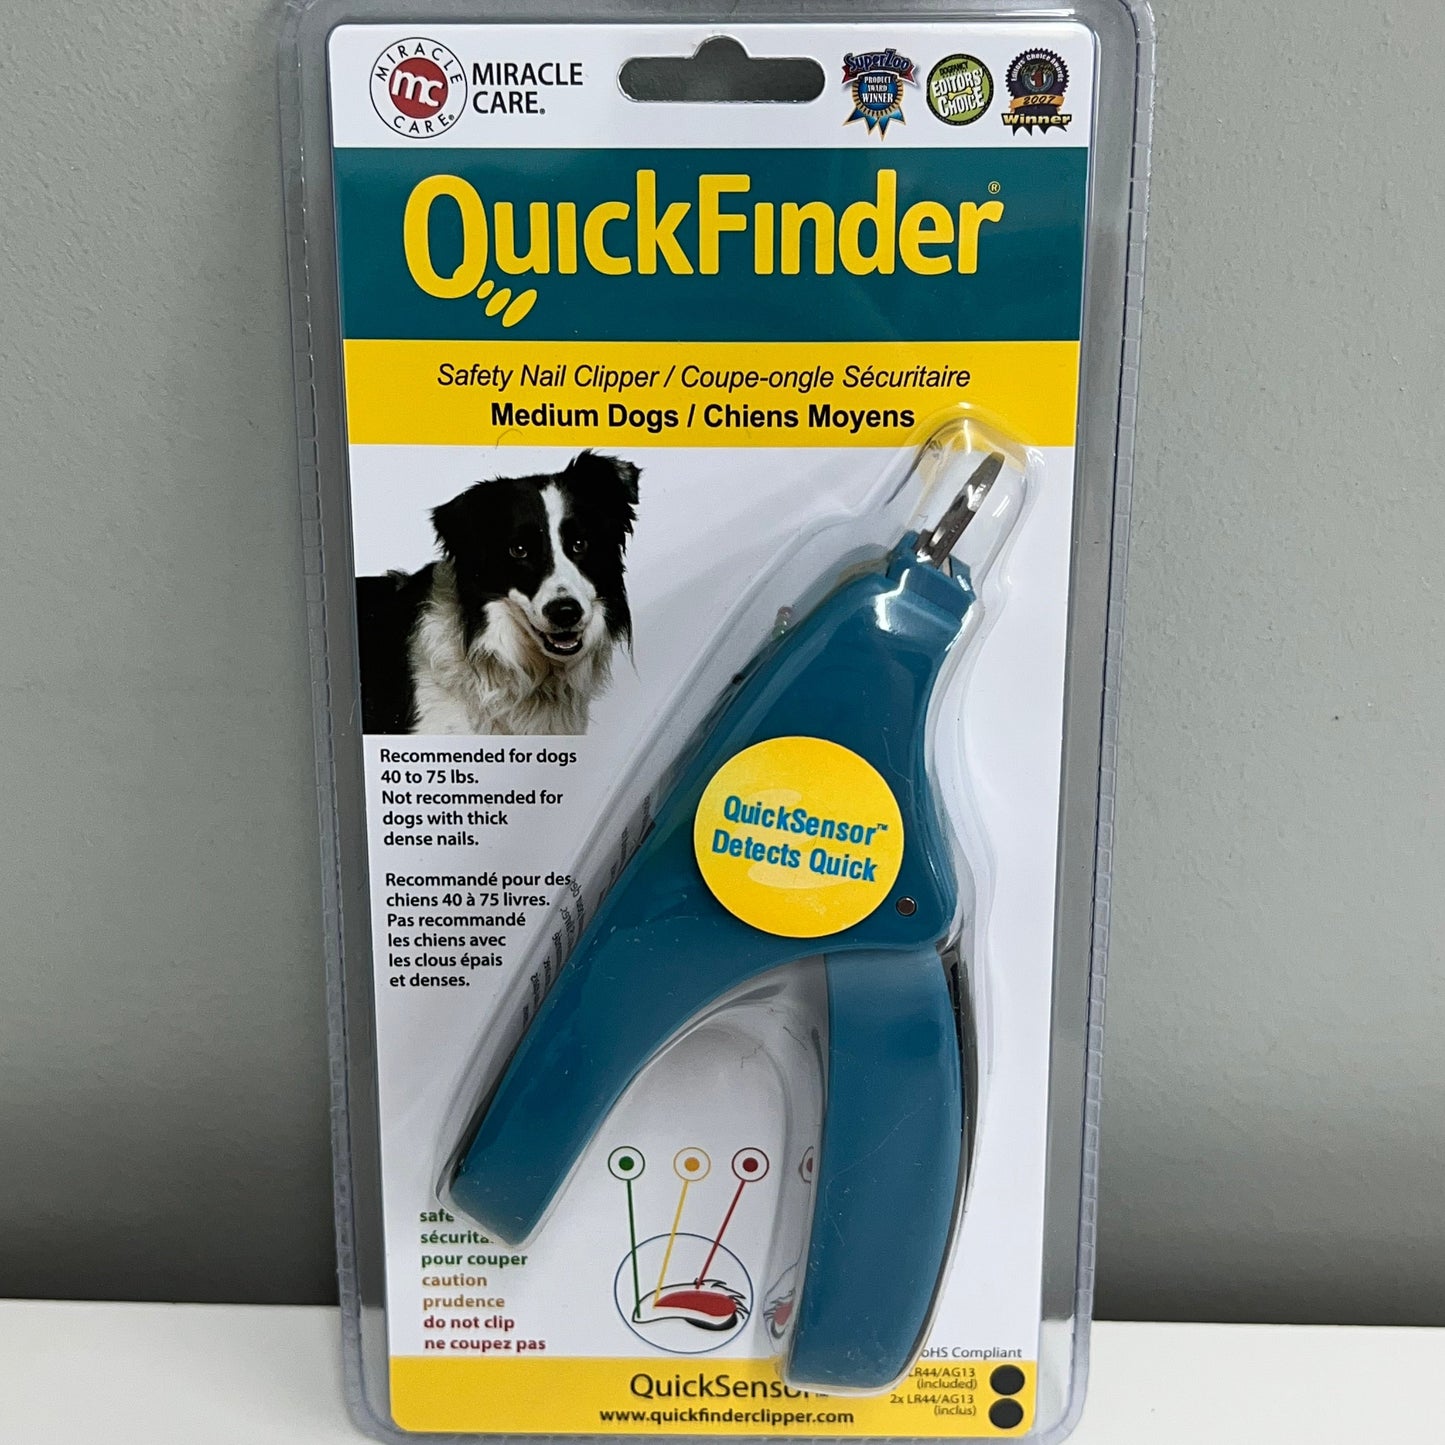 Miracle Care QuickFinder Nail Clipper for Medium Dogs